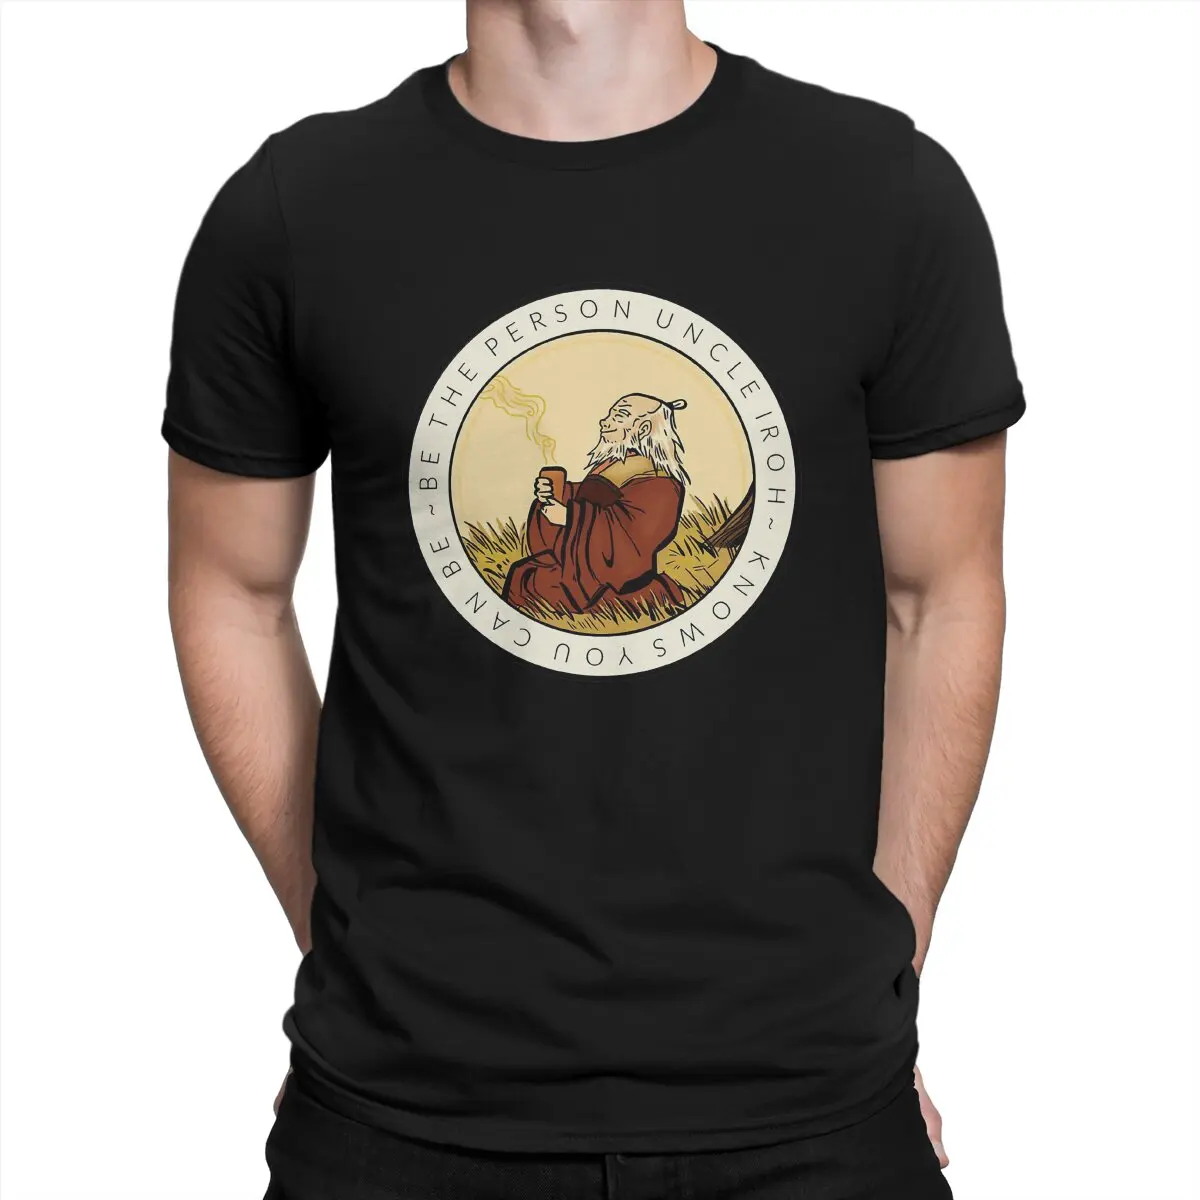 

Avatar The Last Airbender Aang Water Tribes Earth Kingdom Newest TShirt for Men Motivation From Uncle Iroh Pure Cotton T Shirt